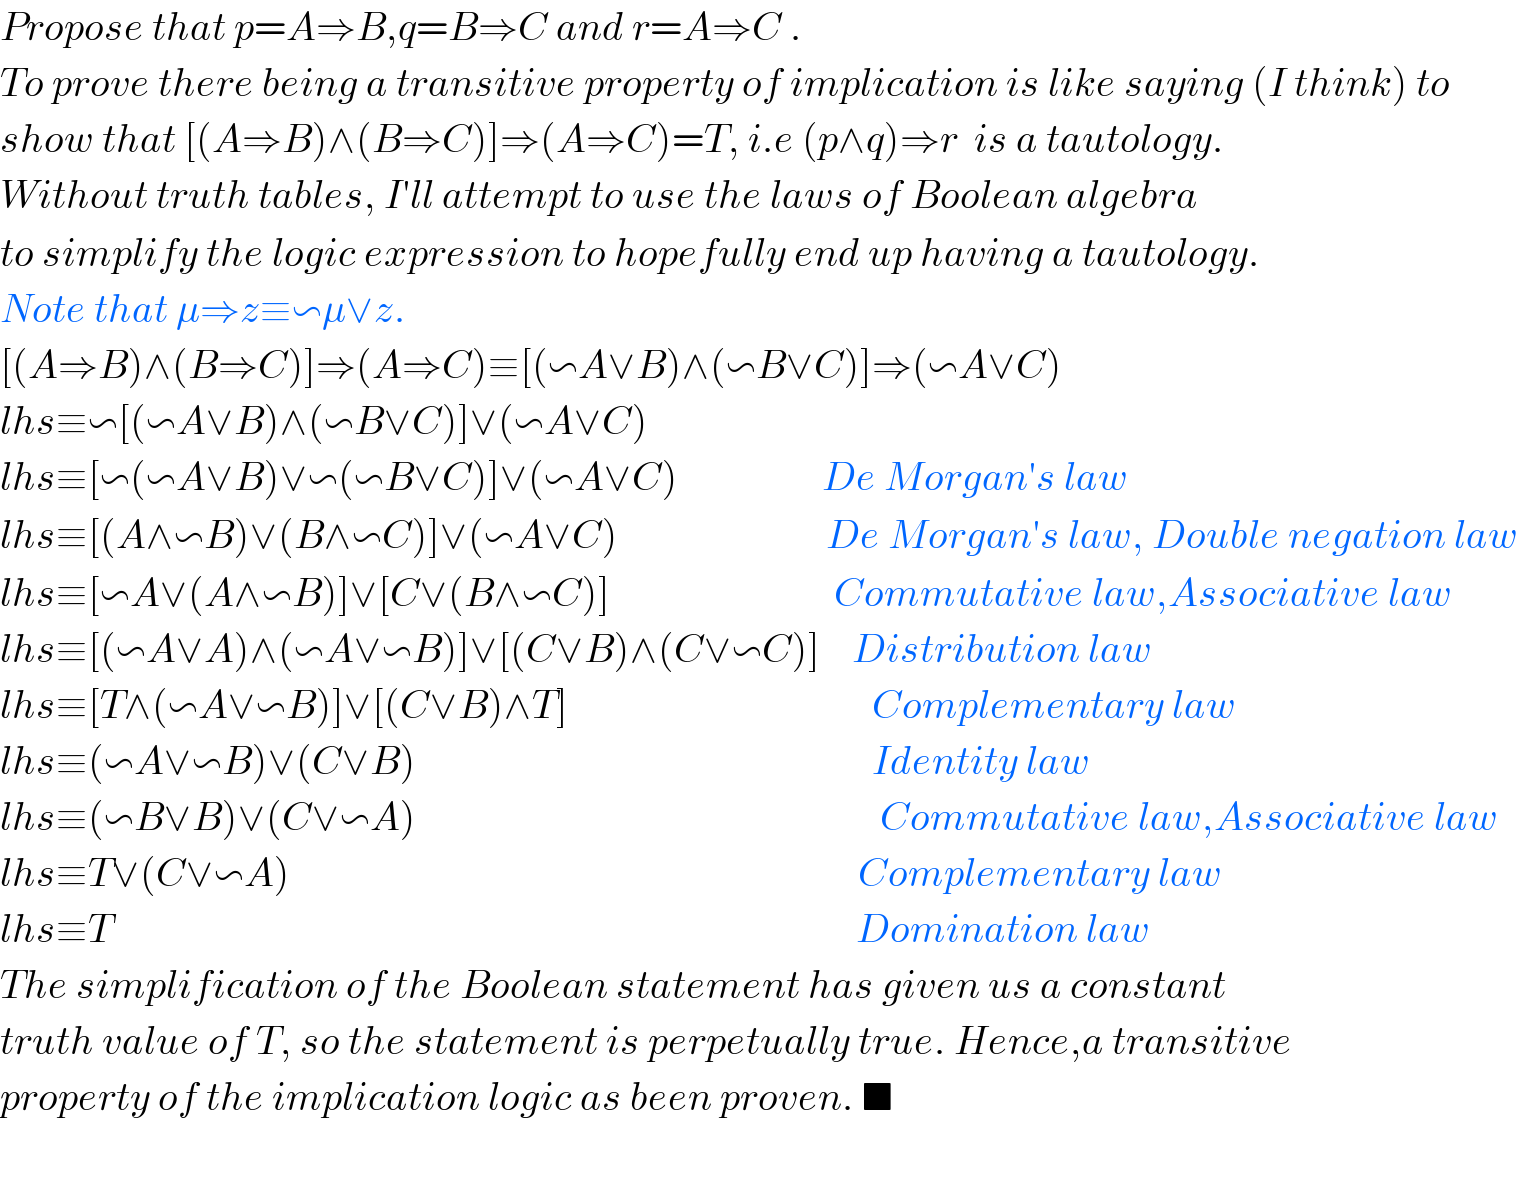 Propose that p=A⇒B,q=B⇒C and r=A⇒C .  To prove there being a transitive property of implication is like saying (I think) to   show that [(A⇒B)∧(B⇒C)]⇒(A⇒C)=T, i.e (p∧q)⇒r  is a tautology.  Without truth tables, I′ll attempt to use the laws of Boolean algebra  to simplify the logic expression to hopefully end up having a tautology.  Note that μ⇒z≡∽μ∨z.  [(A⇒B)∧(B⇒C)]⇒(A⇒C)≡[(∽A∨B)∧(∽B∨C)]⇒(∽A∨C)  lhs≡∽[(∽A∨B)∧(∽B∨C)]∨(∽A∨C)  lhs≡[∽(∽A∨B)∨∽(∽B∨C)]∨(∽A∨C)                  De Morgan′s law  lhs≡[(A∧∽B)∨(B∧∽C)]∨(∽A∨C)                          De Morgan′s law, Double negation law  lhs≡[∽A∨(A∧∽B)]∨[C∨(B∧∽C)]                            Commutative law,Associative law  lhs≡[(∽A∨A)∧(∽A∨∽B)]∨[(C∨B)∧(C∨∽C)]    Distribution law  lhs≡[T∧(∽A∨∽B)]∨[(C∨B)∧T]                                      Complementary law  lhs≡(∽A∨∽B)∨(C∨B)                                                         Identity law  lhs≡(∽B∨B)∨(C∨∽A)                                                          Commutative law,Associative law  lhs≡T∨(C∨∽A)                                                                       Complementary law  lhs≡T                                                                                             Domination law   The simplification of the Boolean statement has given us a constant  truth value of T, so the statement is perpetually true. Hence,a transitive  property of the implication logic as been proven. ■    